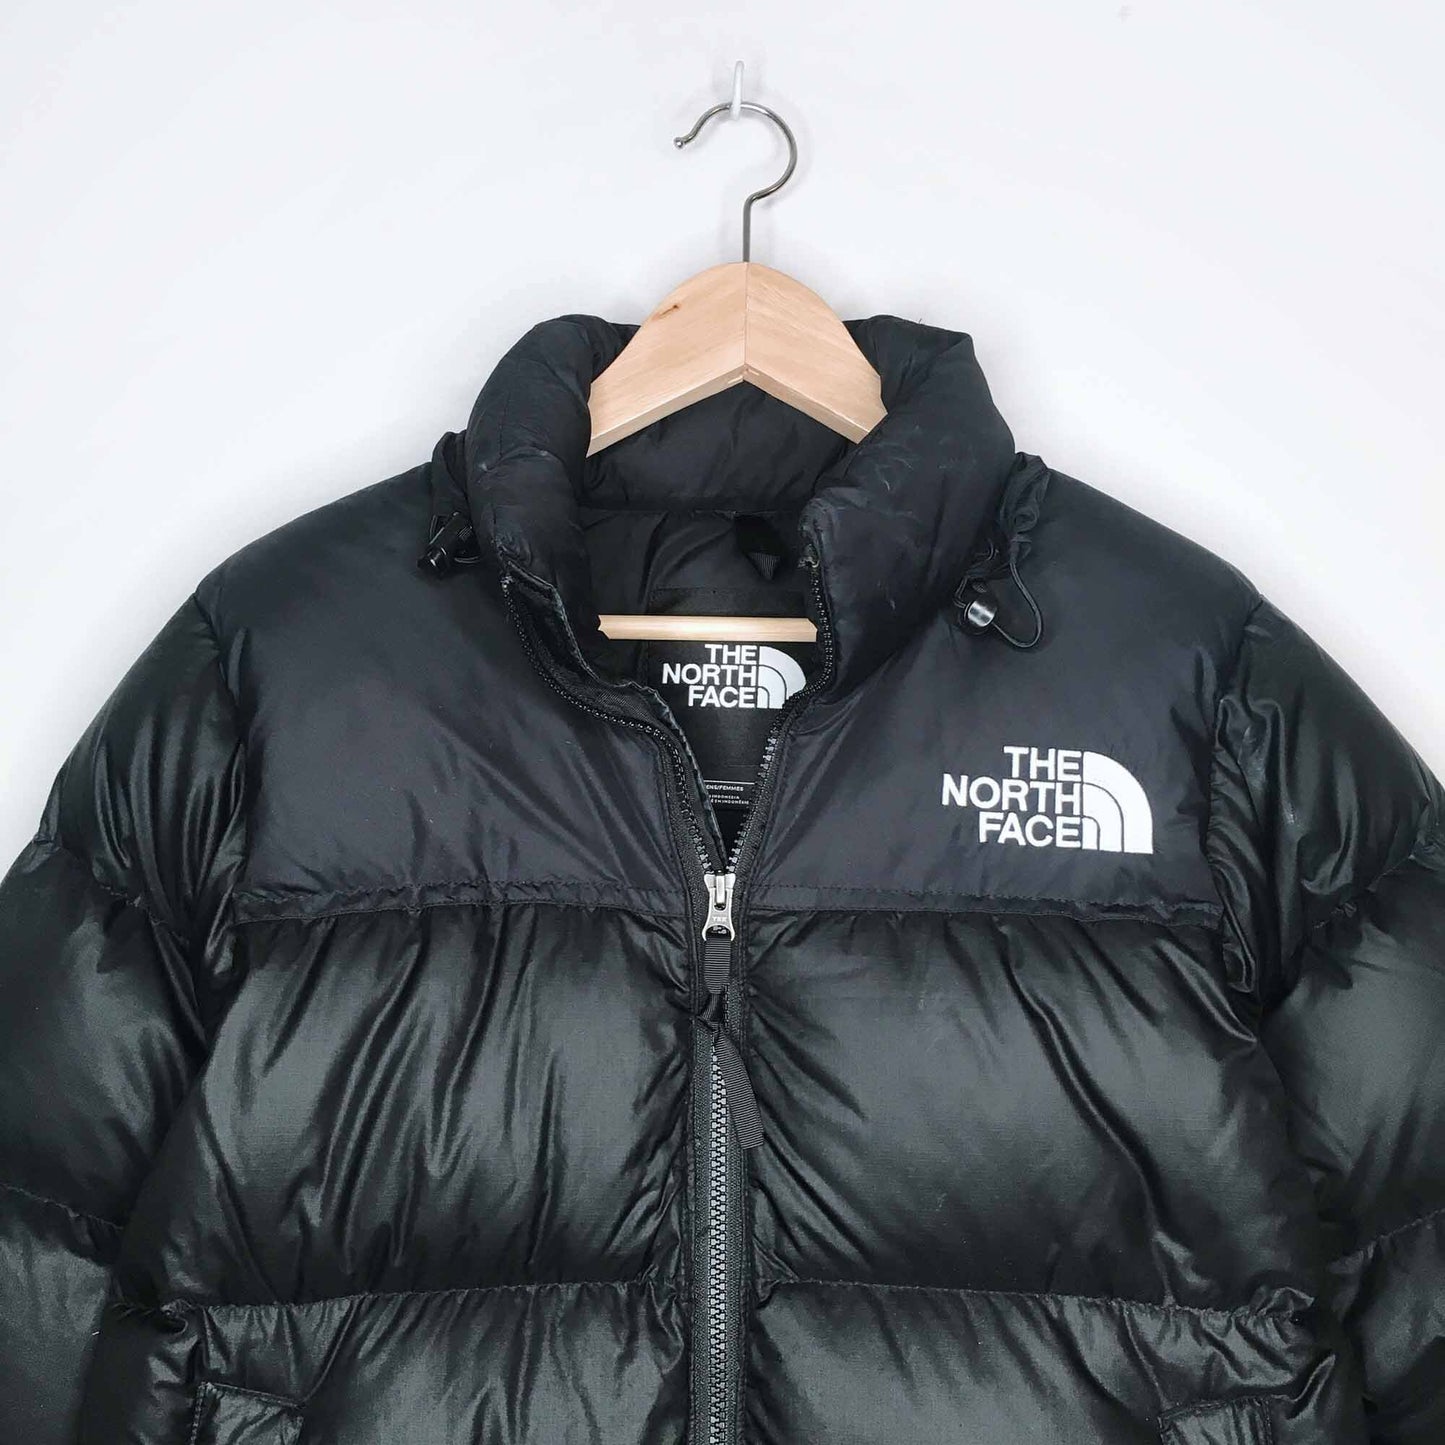 The North Face 1996 Nuptse down puffer jacket 700 - size xs